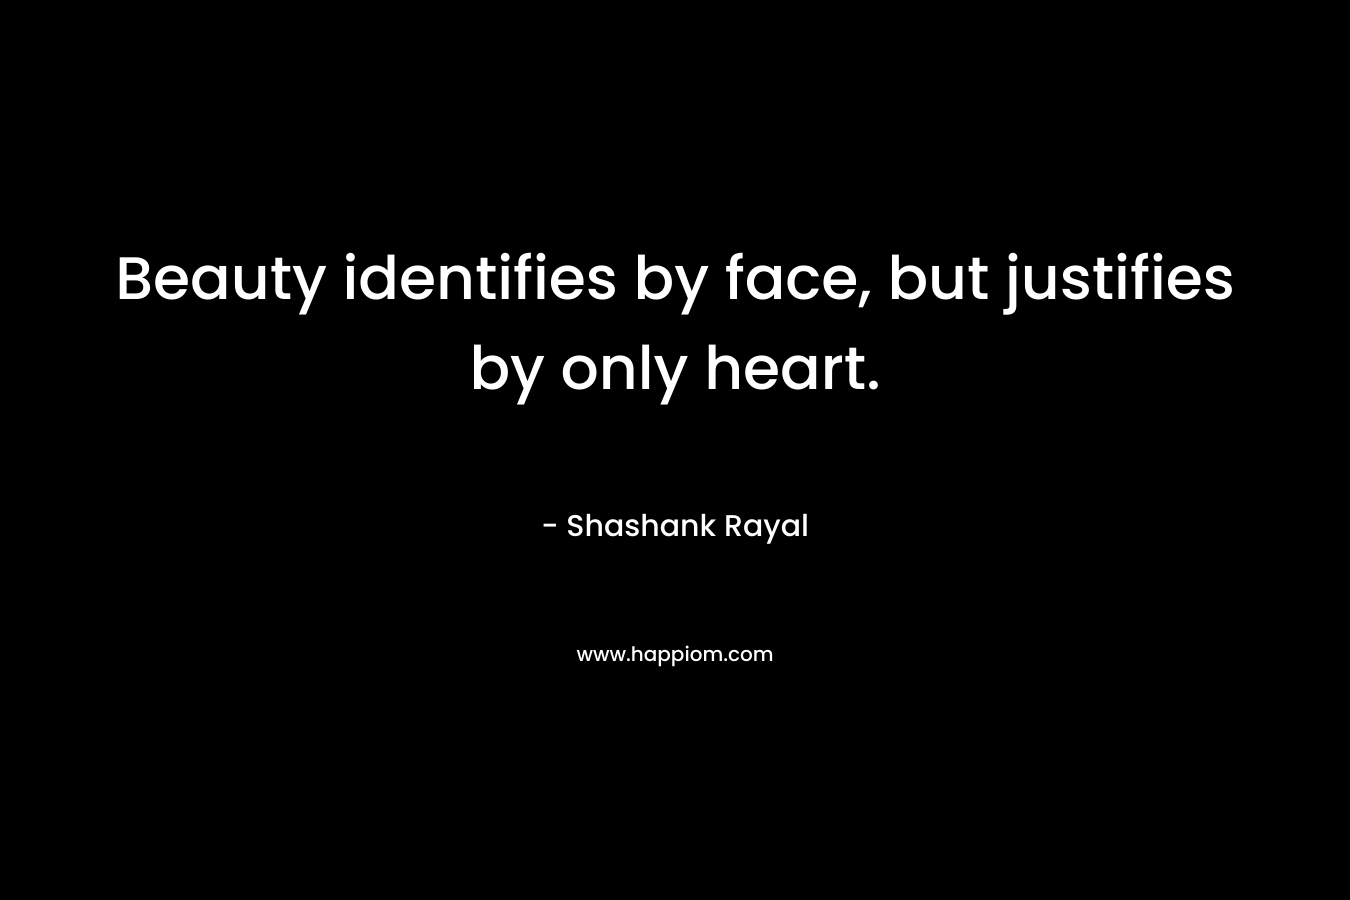 Beauty identifies by face, but justifies by only heart.